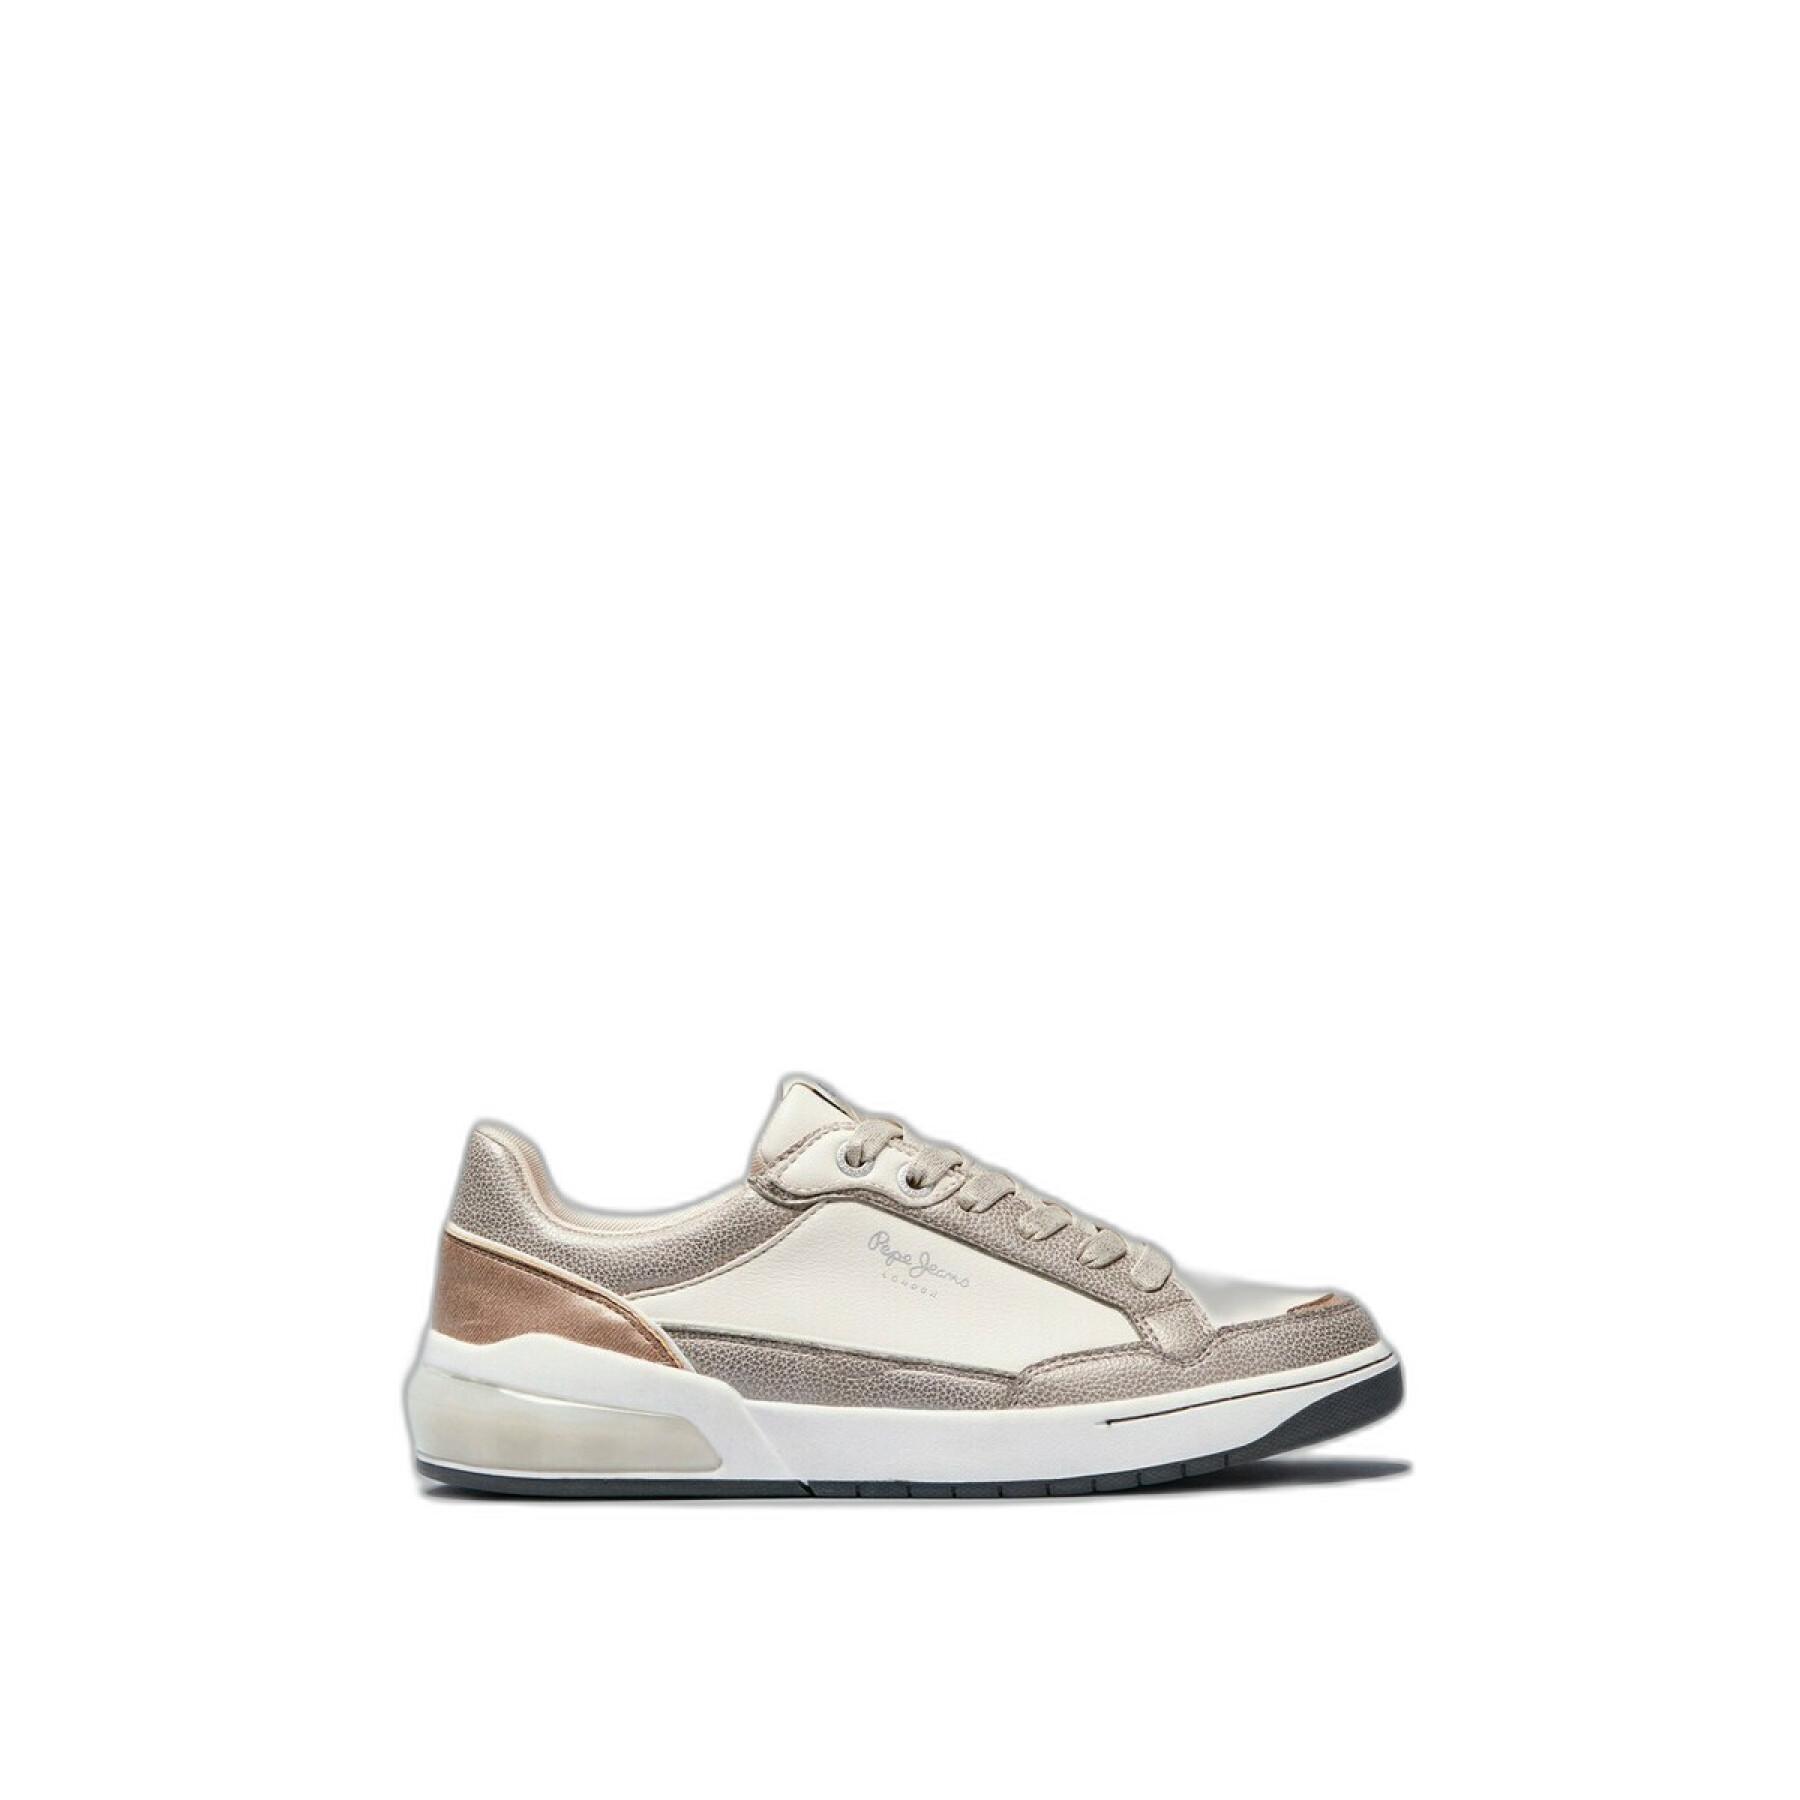 Baskets femme Pepe Jeans Marble Glam